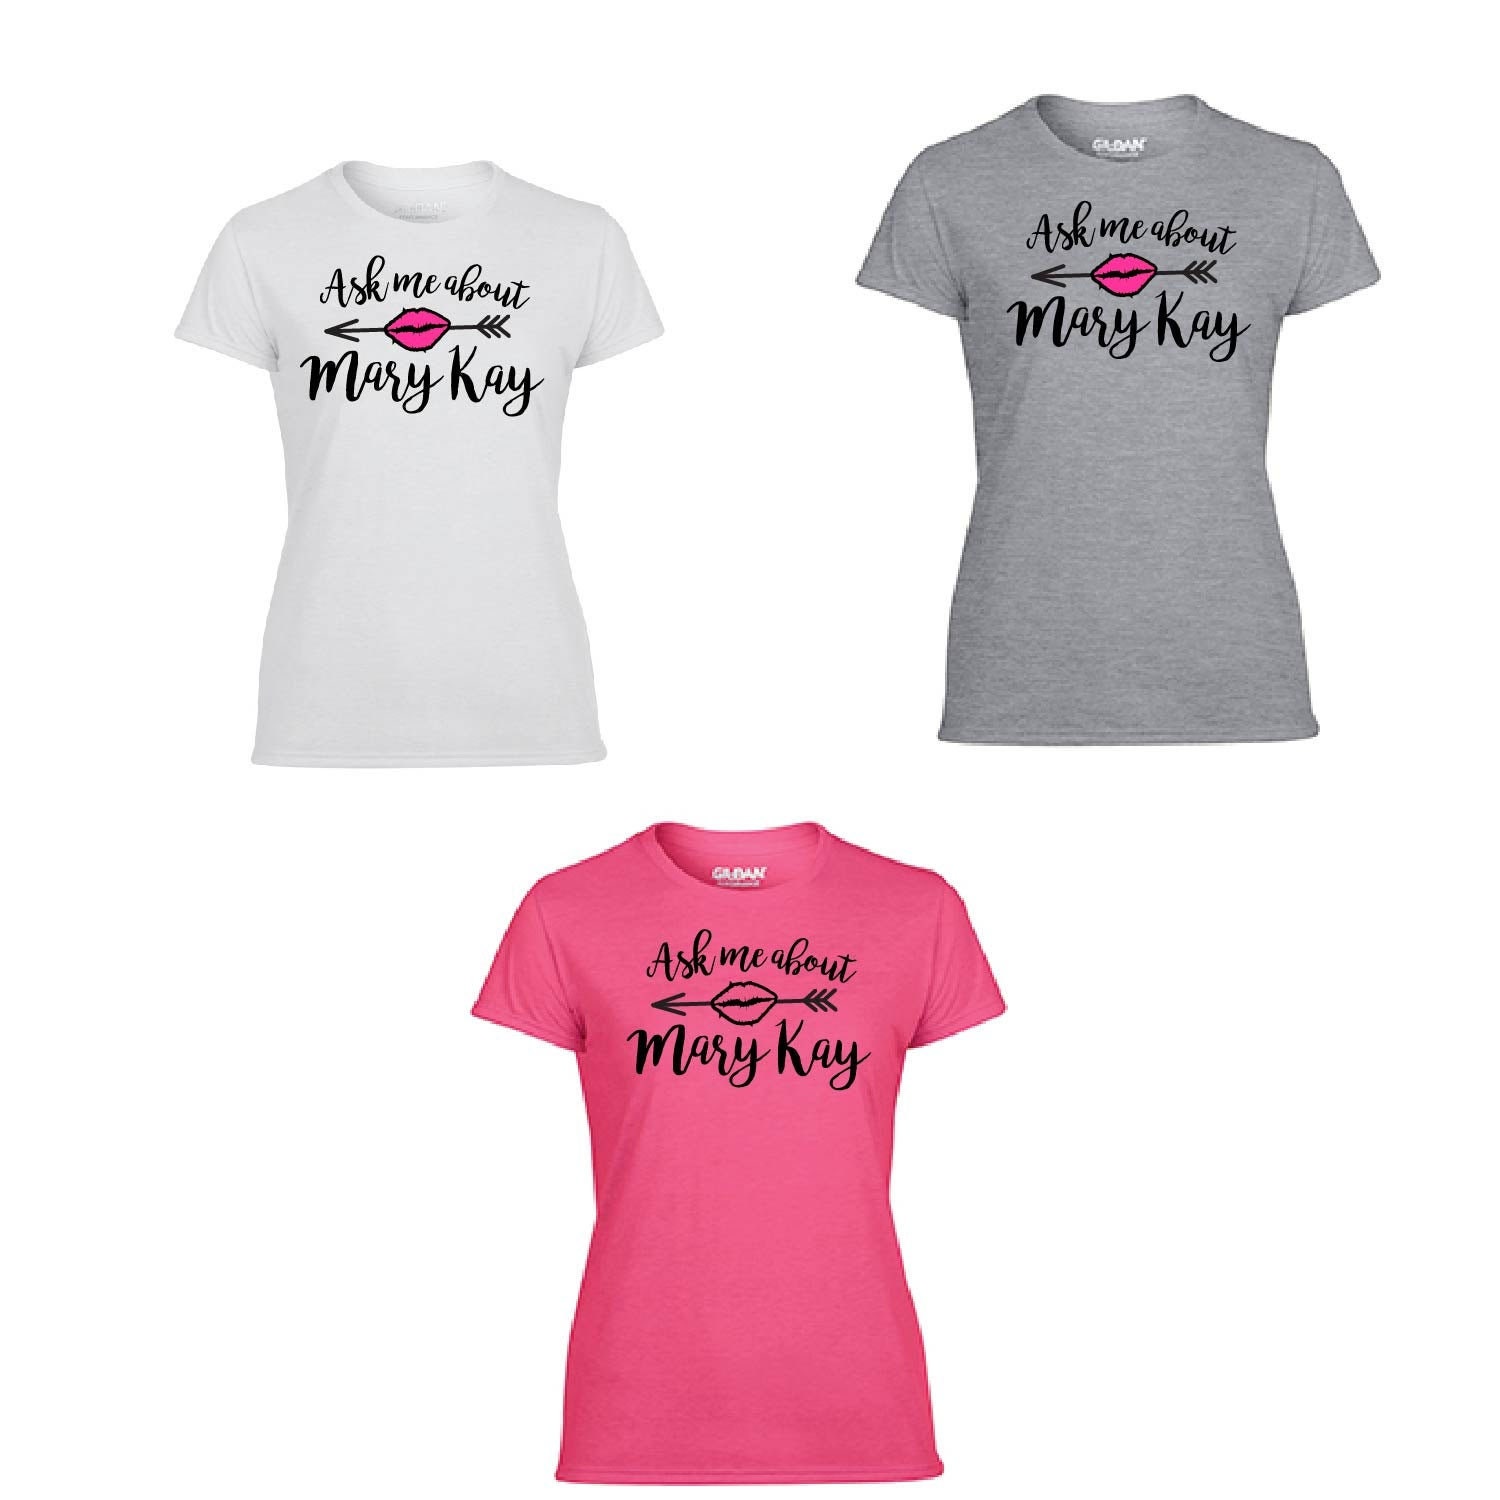 Ask Me About Mary Kay T-Shirt, Mary Kay Tee, Mary Kay Sports T